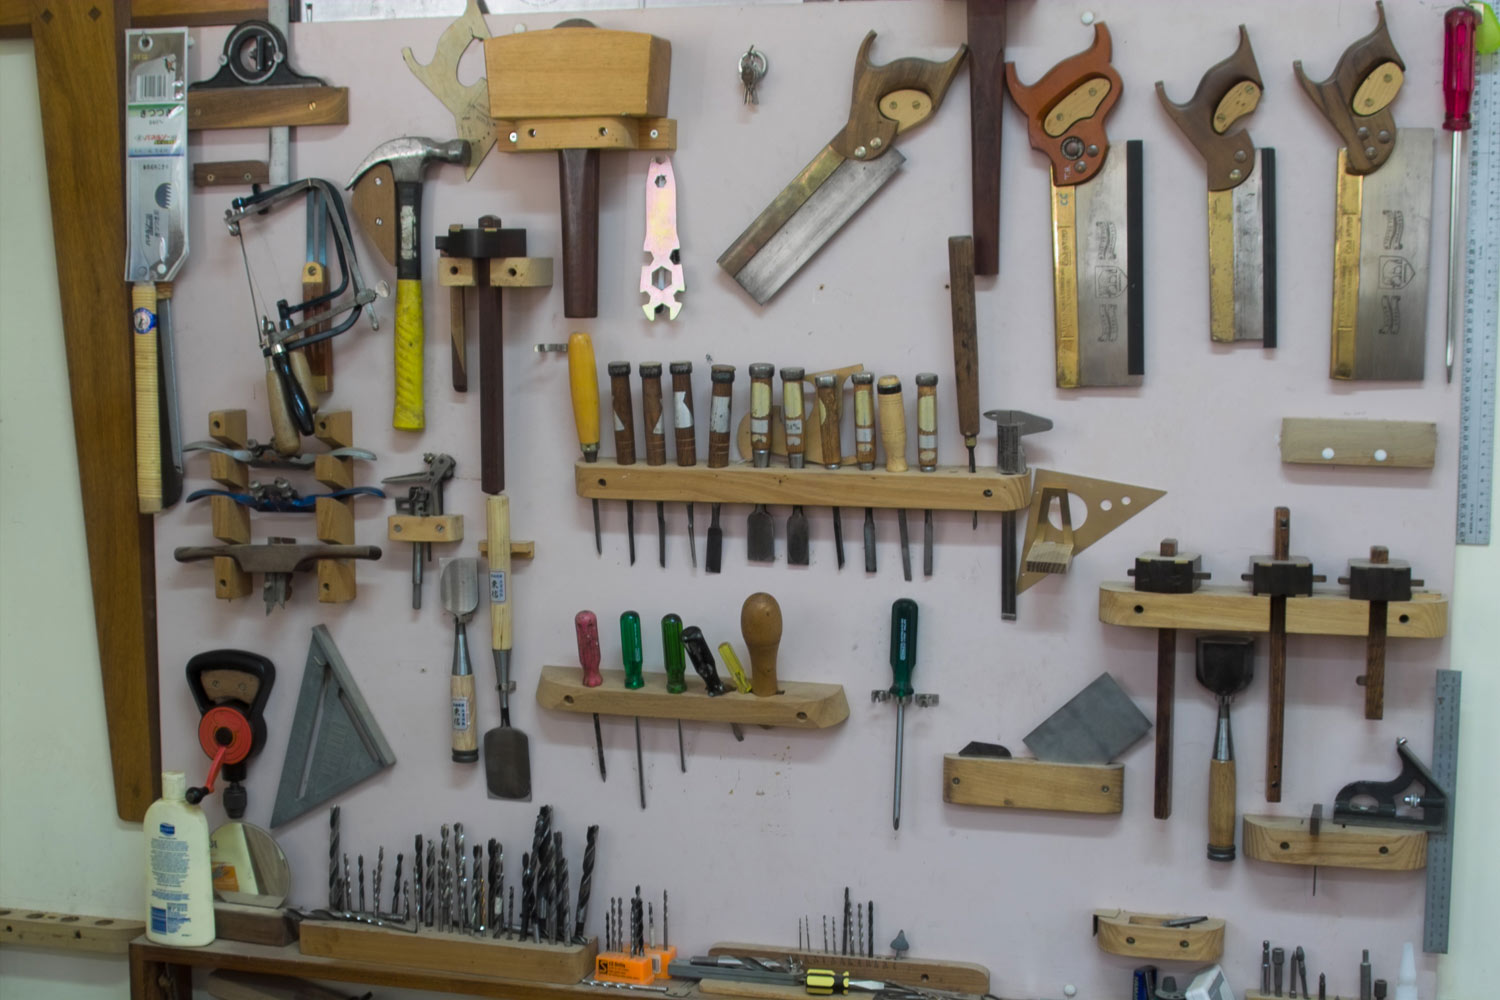 4 Cabinet making and carving tools for furniture making displayed in our workshop